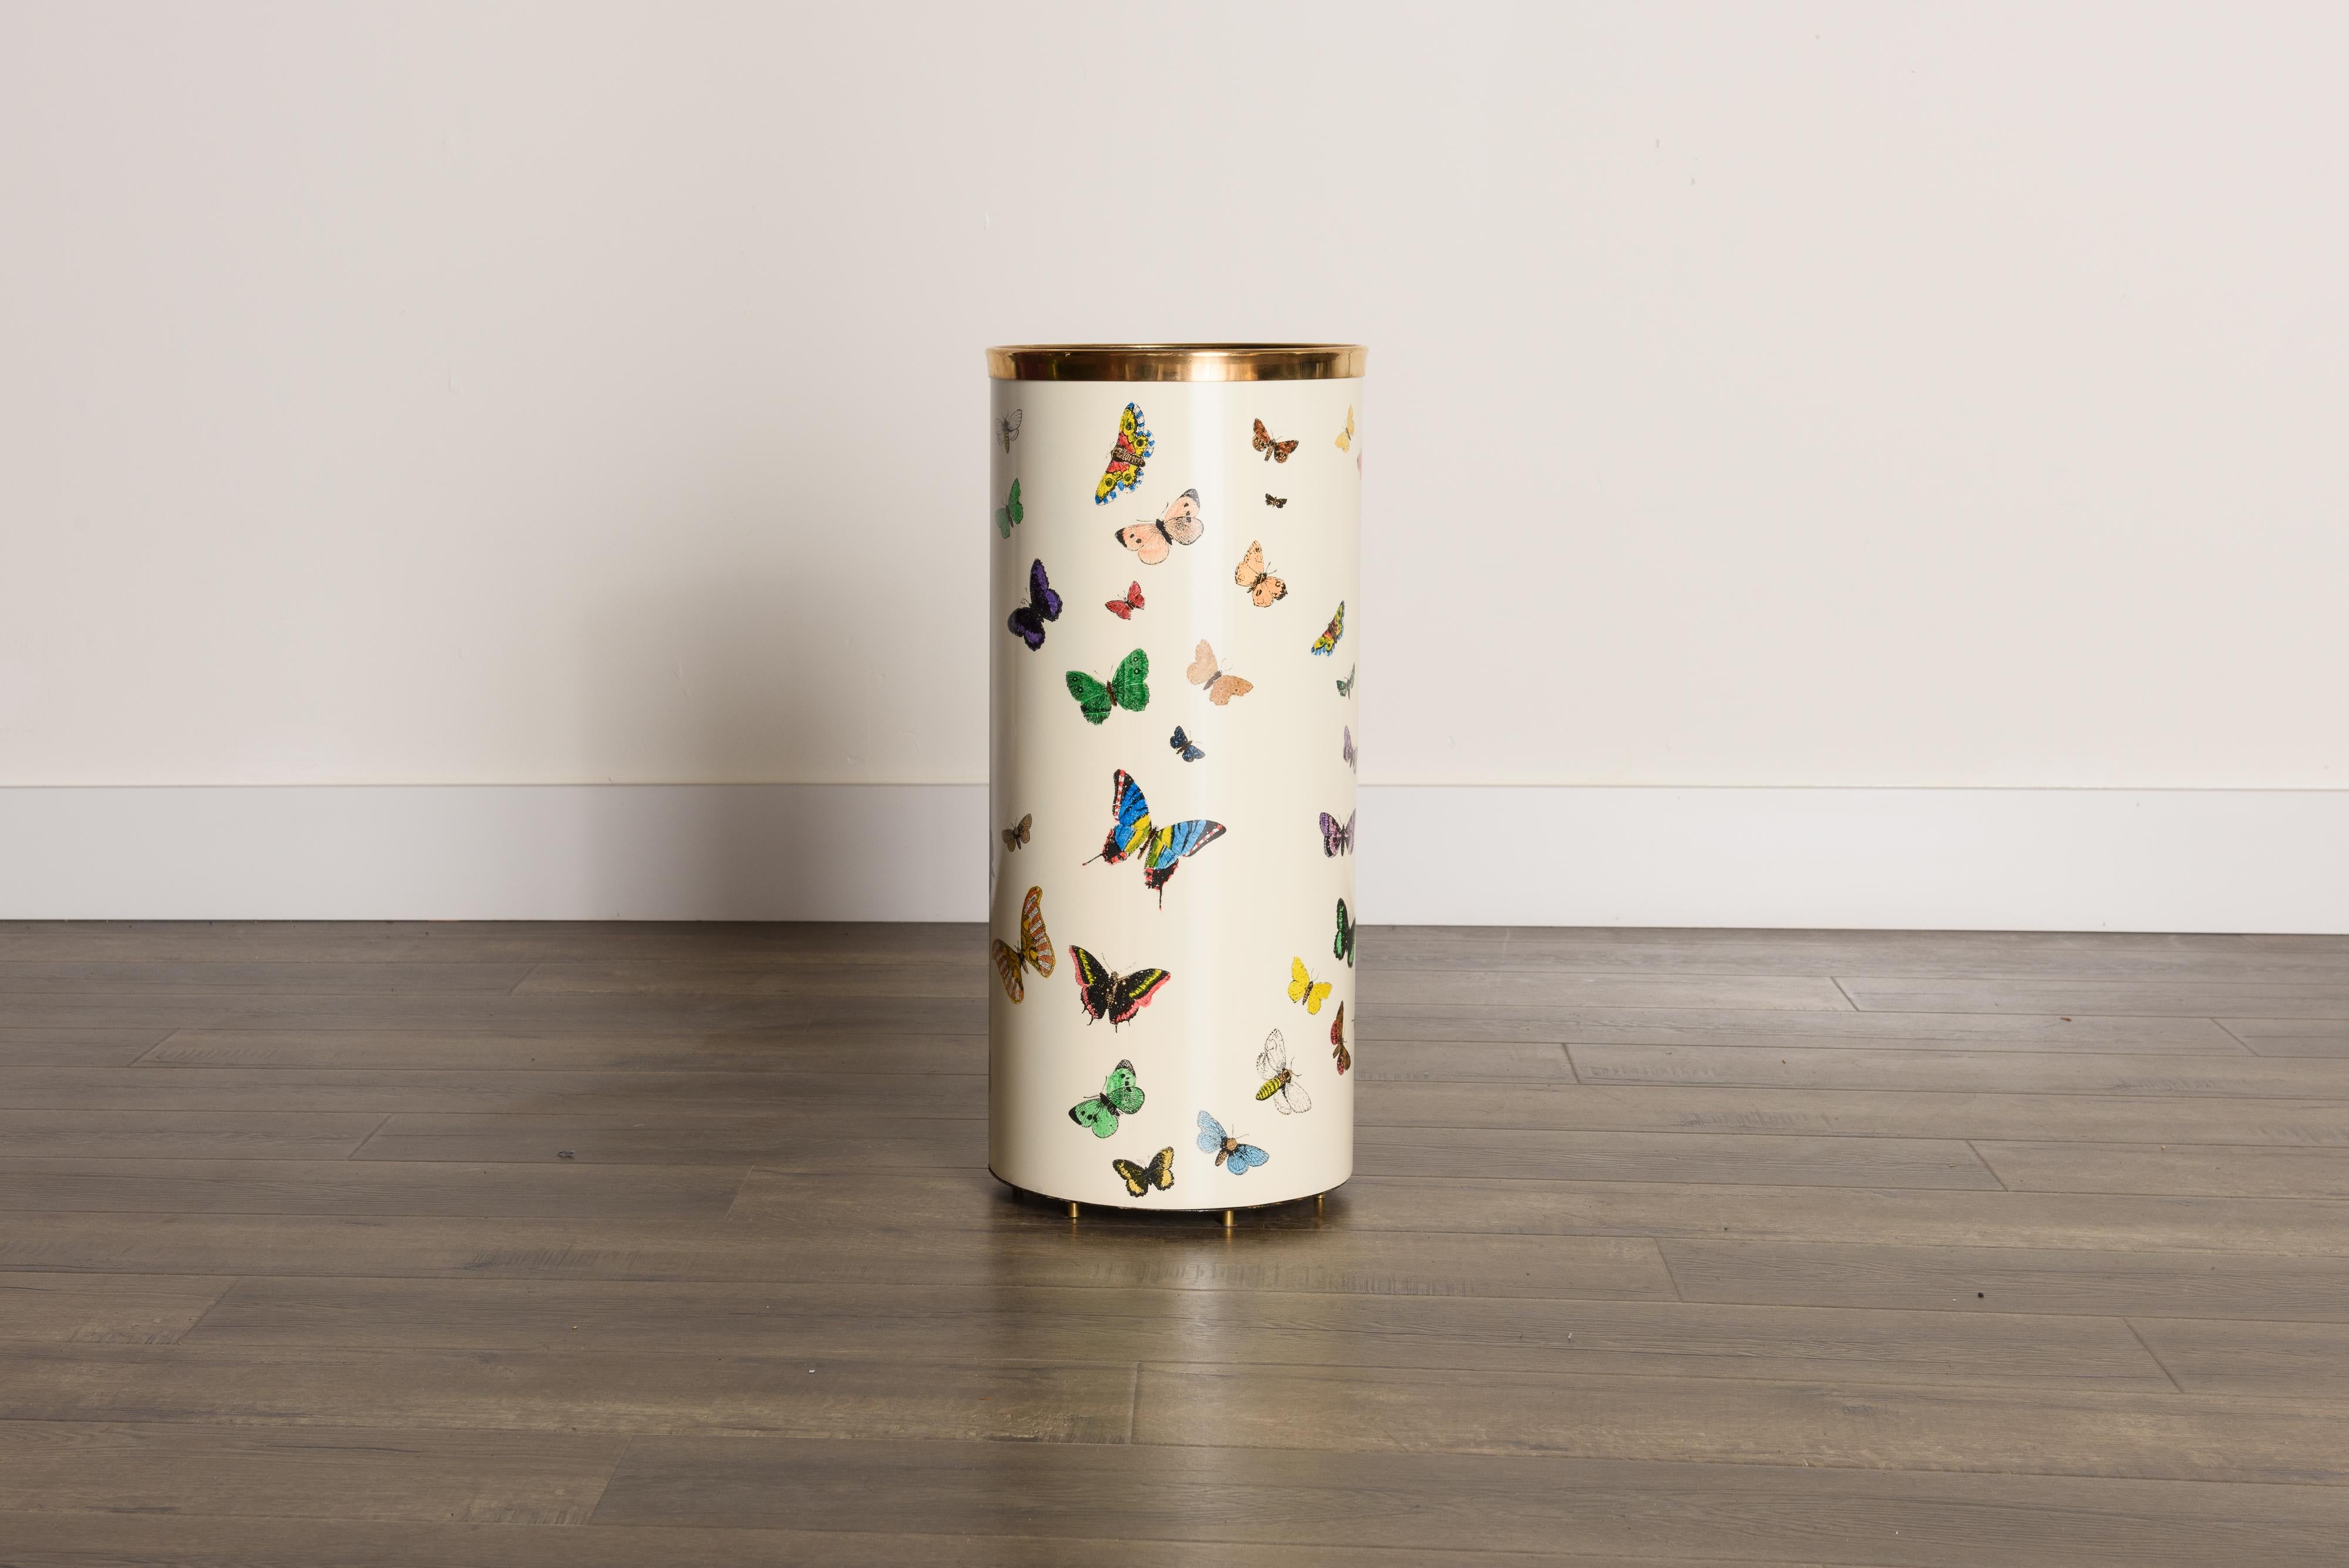 This rare and coveted collectors item is the 'Farfalle' (translated to 'Butterflies') umbrella stand by Piero Fornasetti, circa 1960s, signed underneath. This hefty round umbrella bin is made with lithographic transfer and lacquered metal that has a